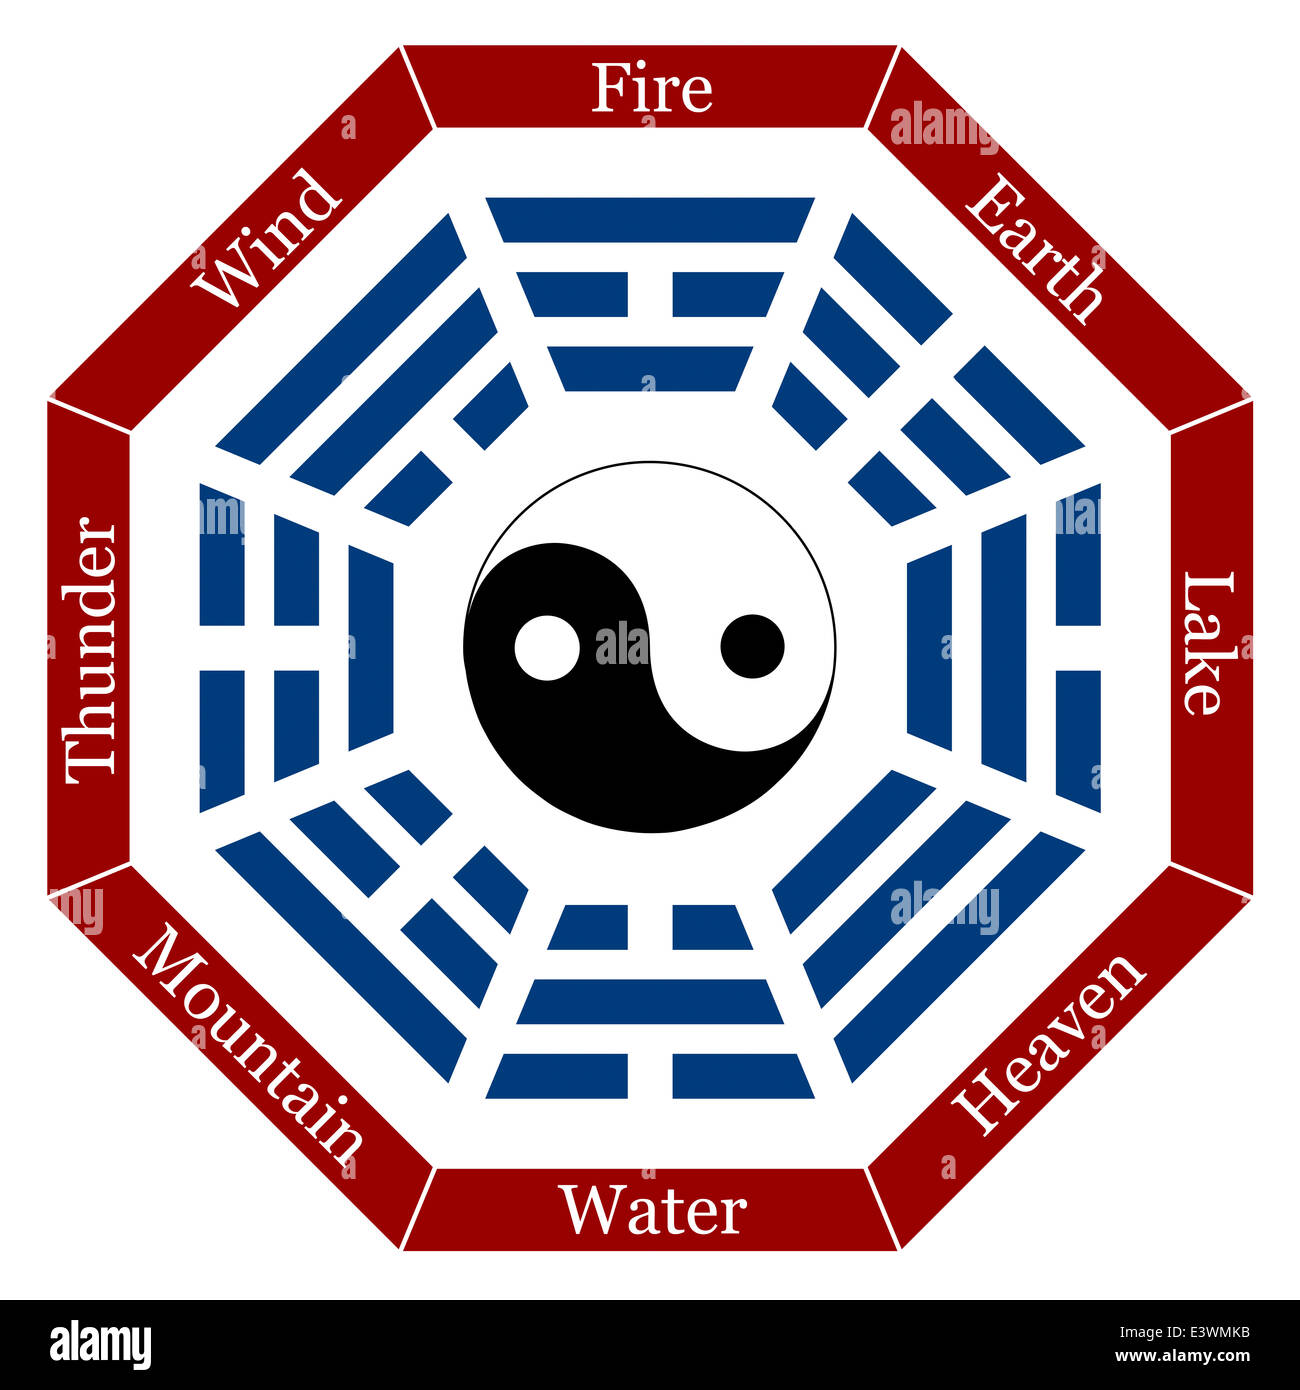 I Ching with eight trigrams, the corresponding names and a yin yang symbol in the center. Stock Photo